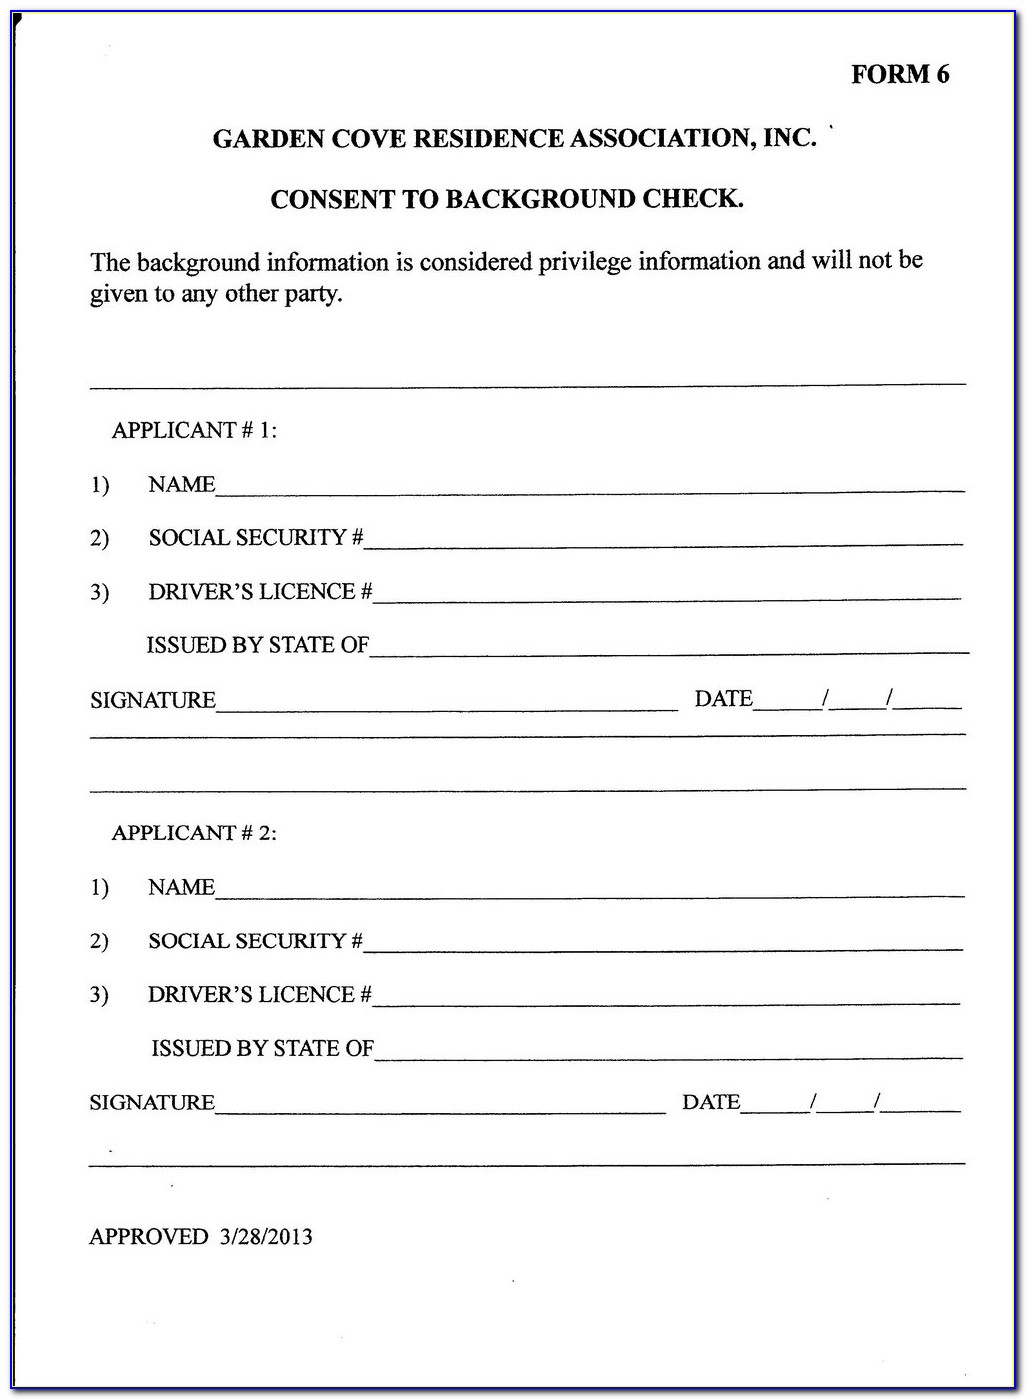 Consent To Background Check Form Tenant